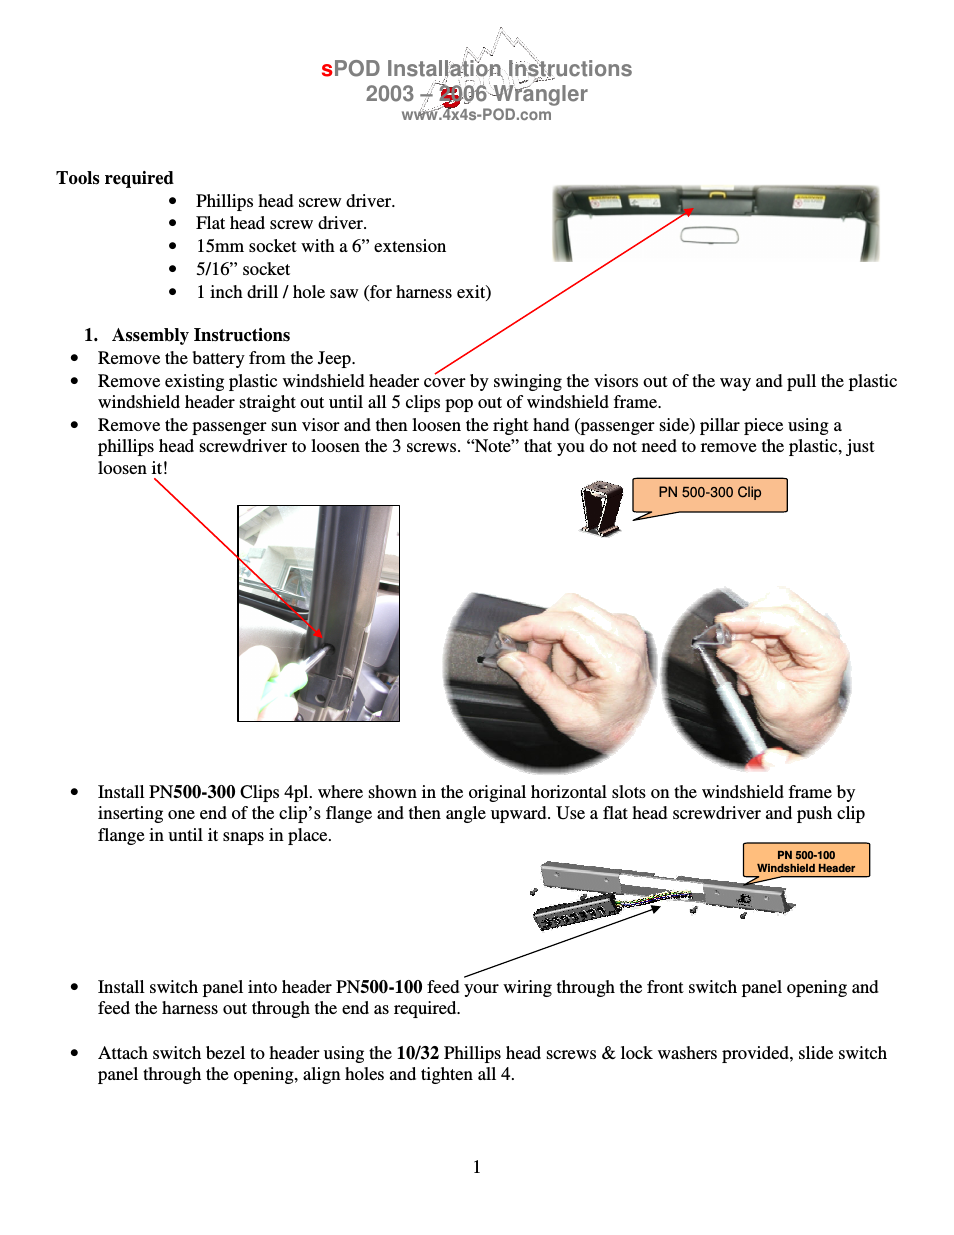 TJ 2003-2006 Instructions over battery